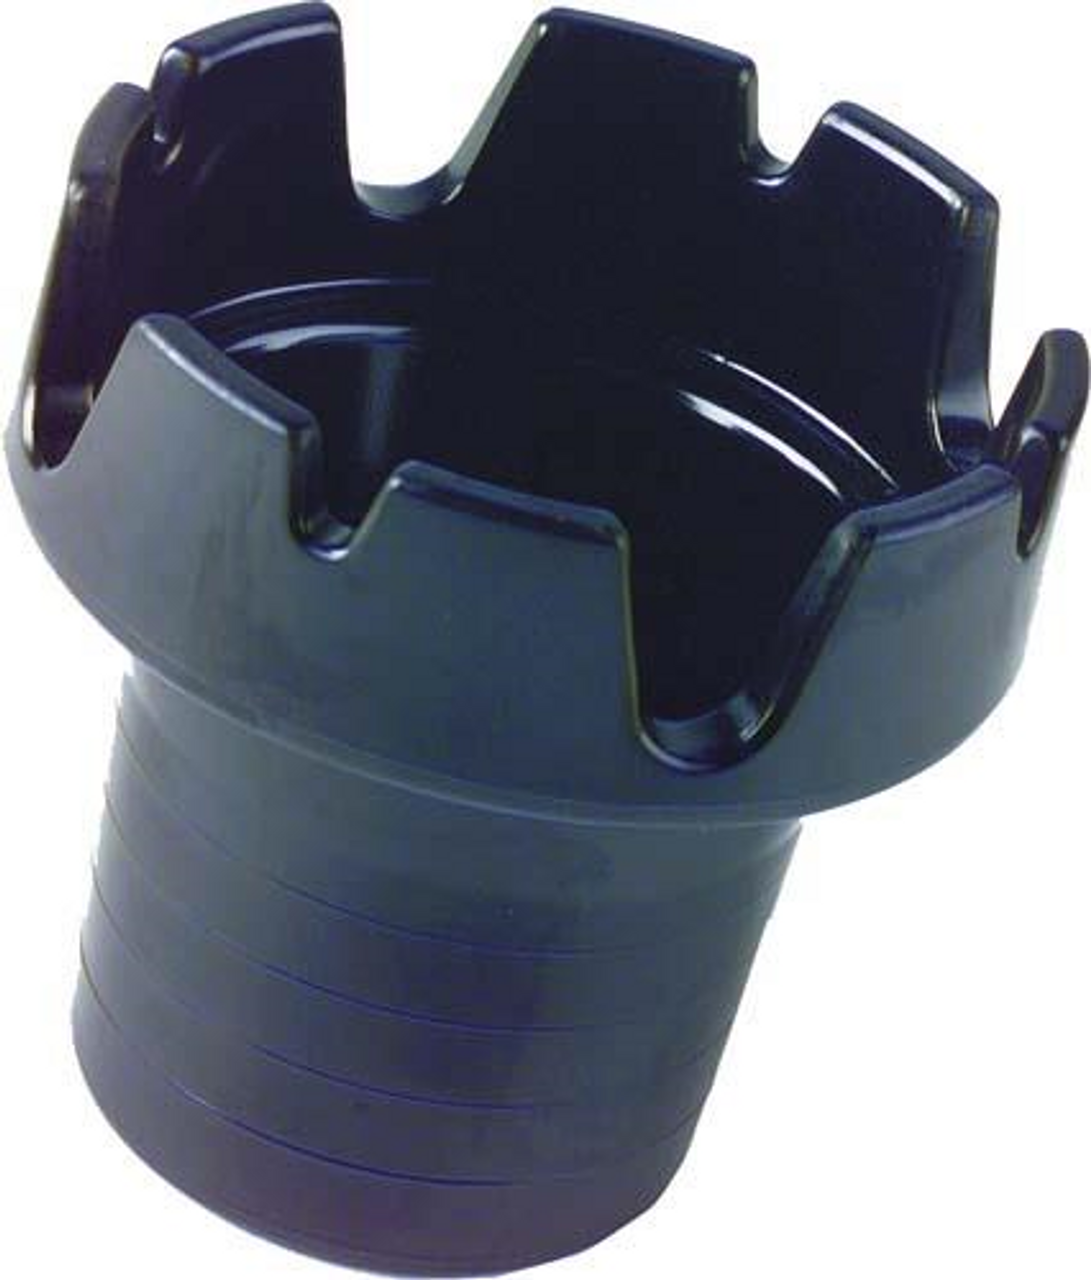 Black Cup Holder / Ashtray (Universal Golf Cart Fit), 28236